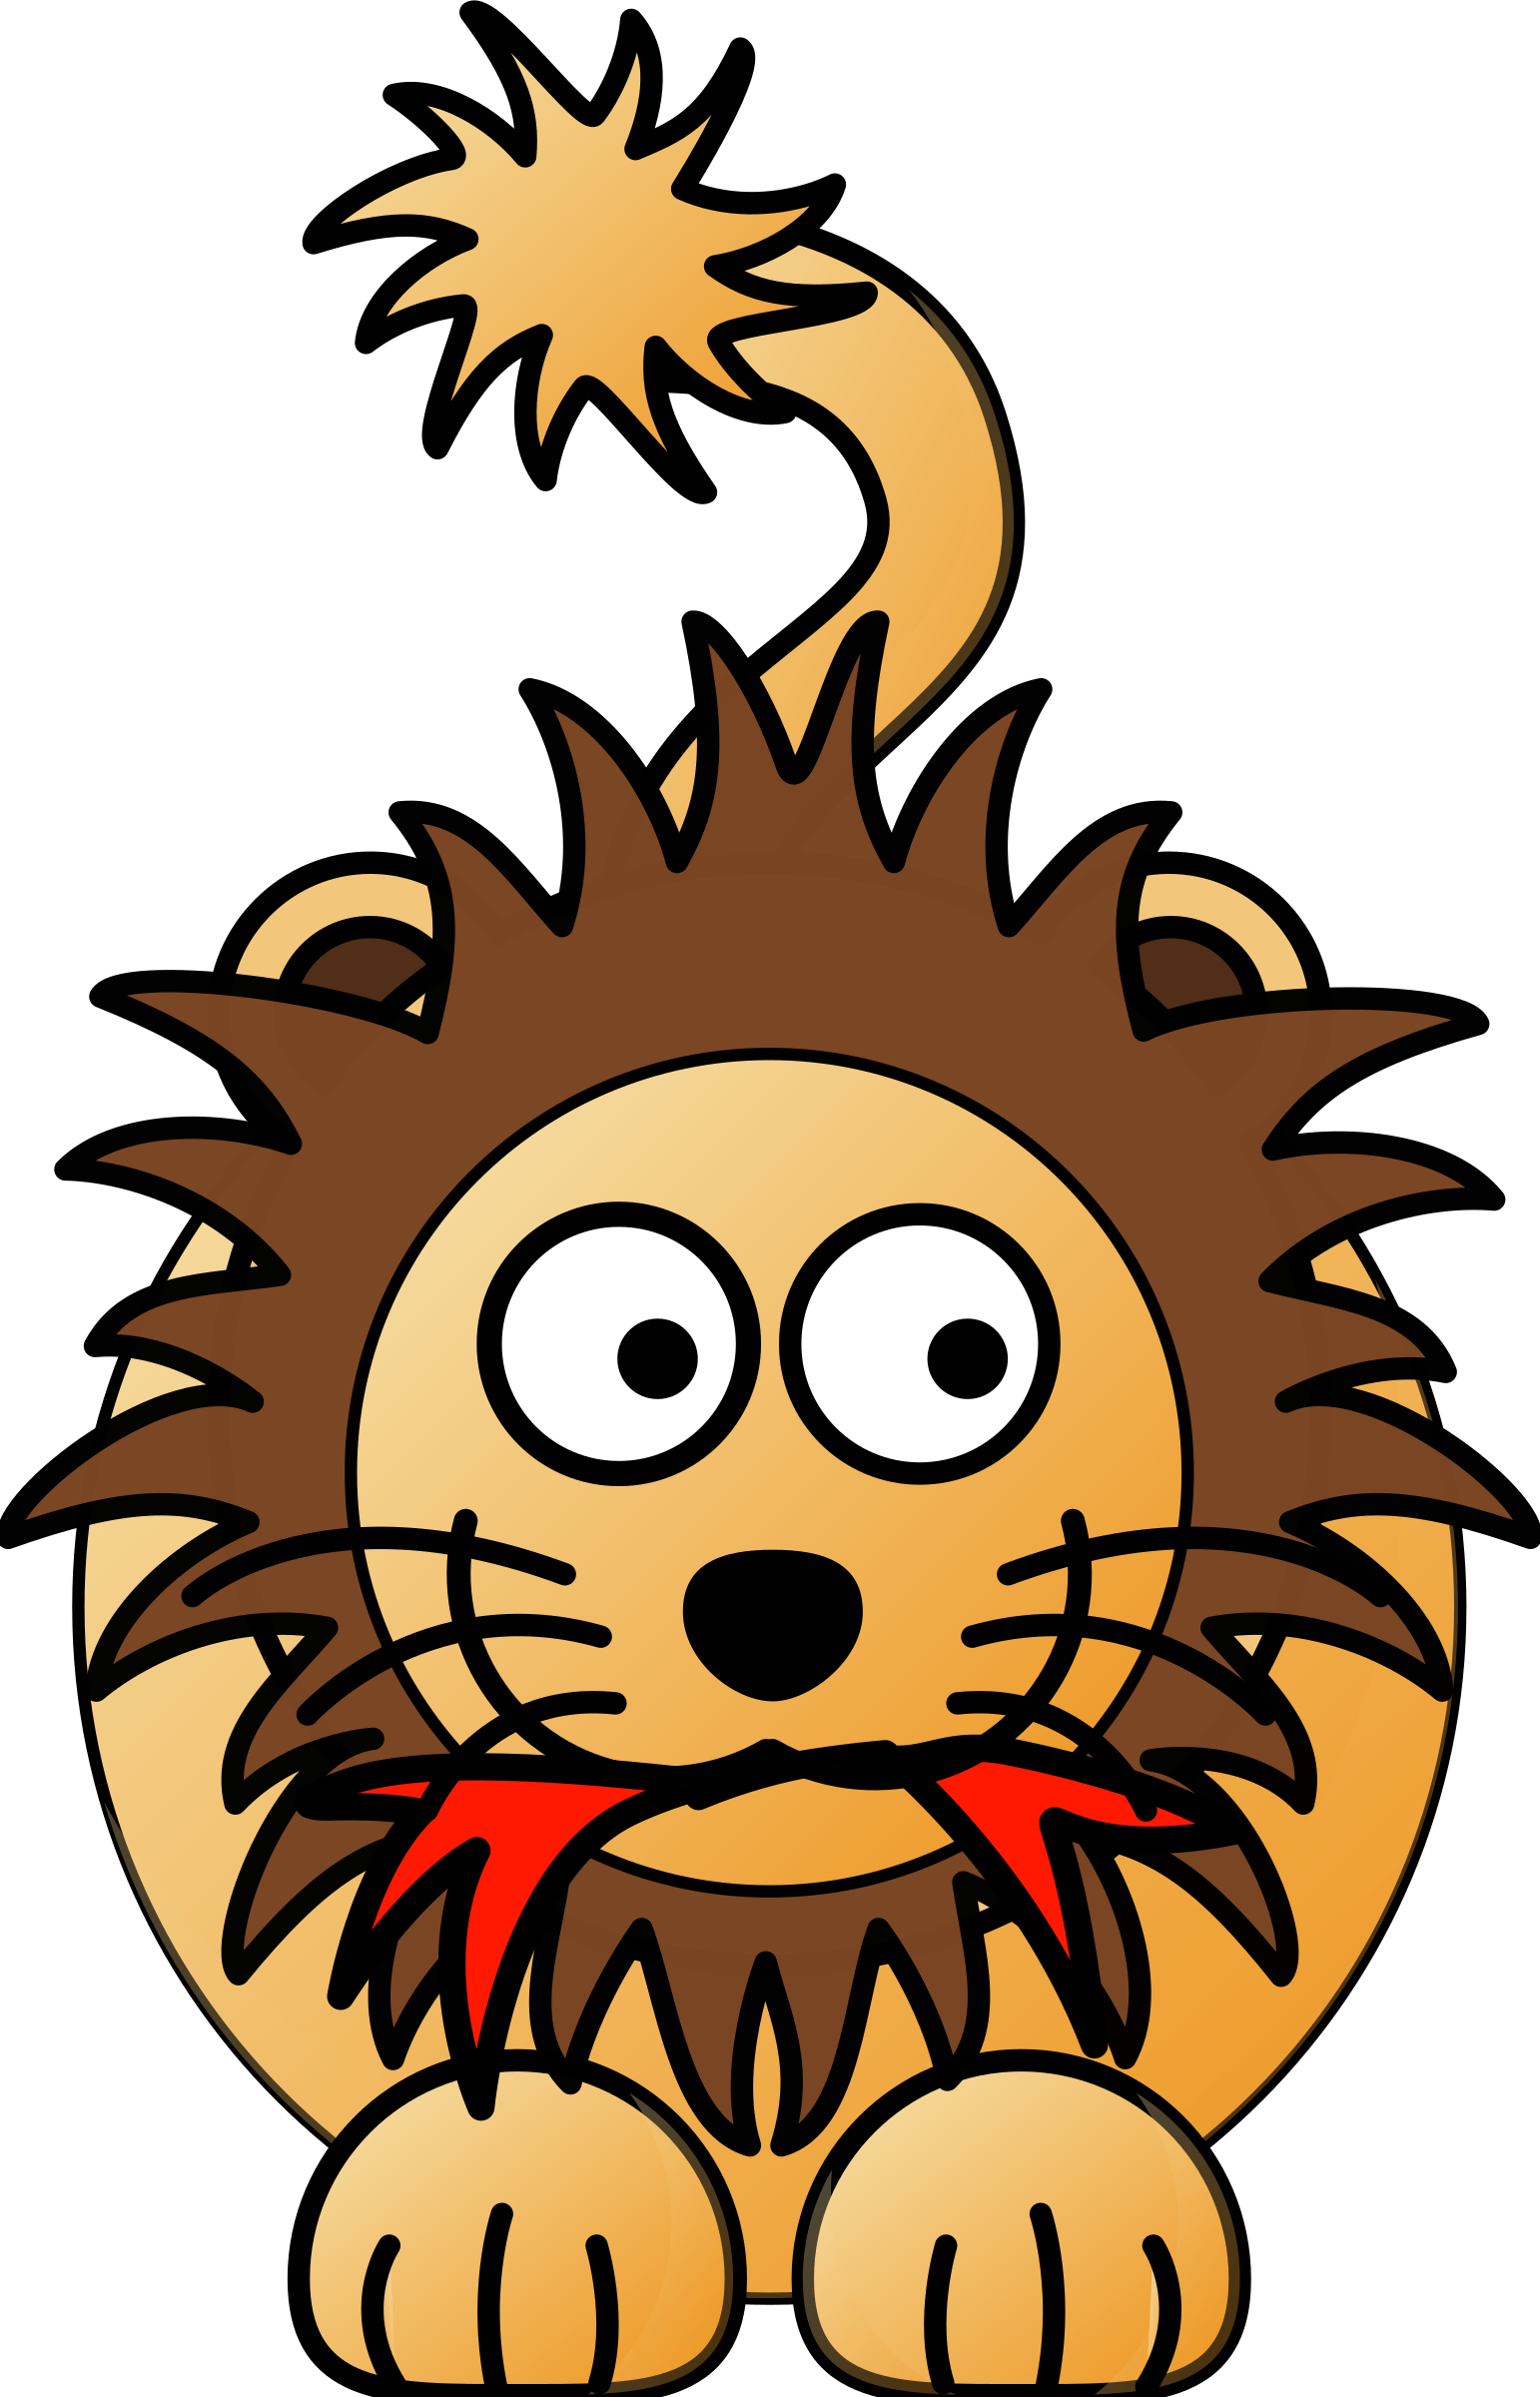 Lion clipart male. Eating big image png